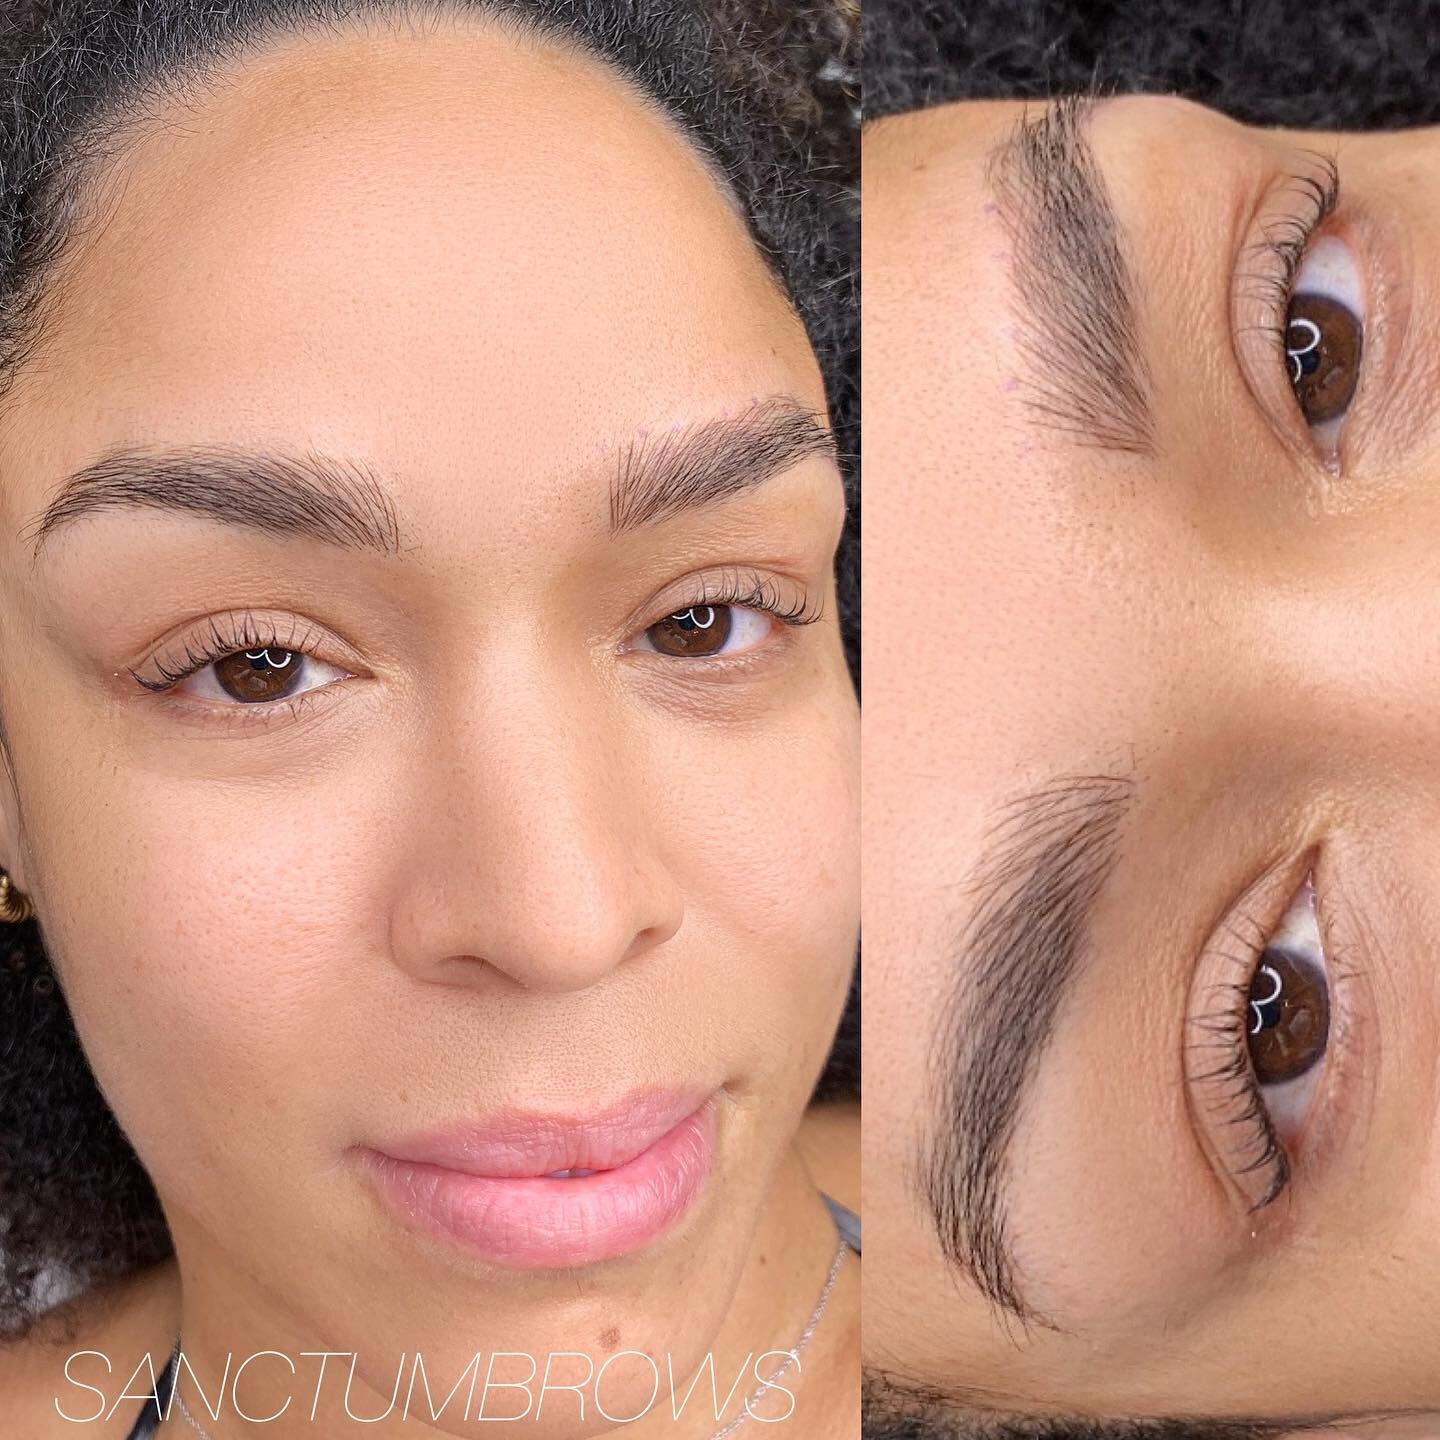 Undetectable Microblading results are my specialty ✨

Swipe to see her before! 

Did you know that each set of brows is 100% customized to enhance your natural features? 

The first half of the appointment I consult about brow goals, then custom desi